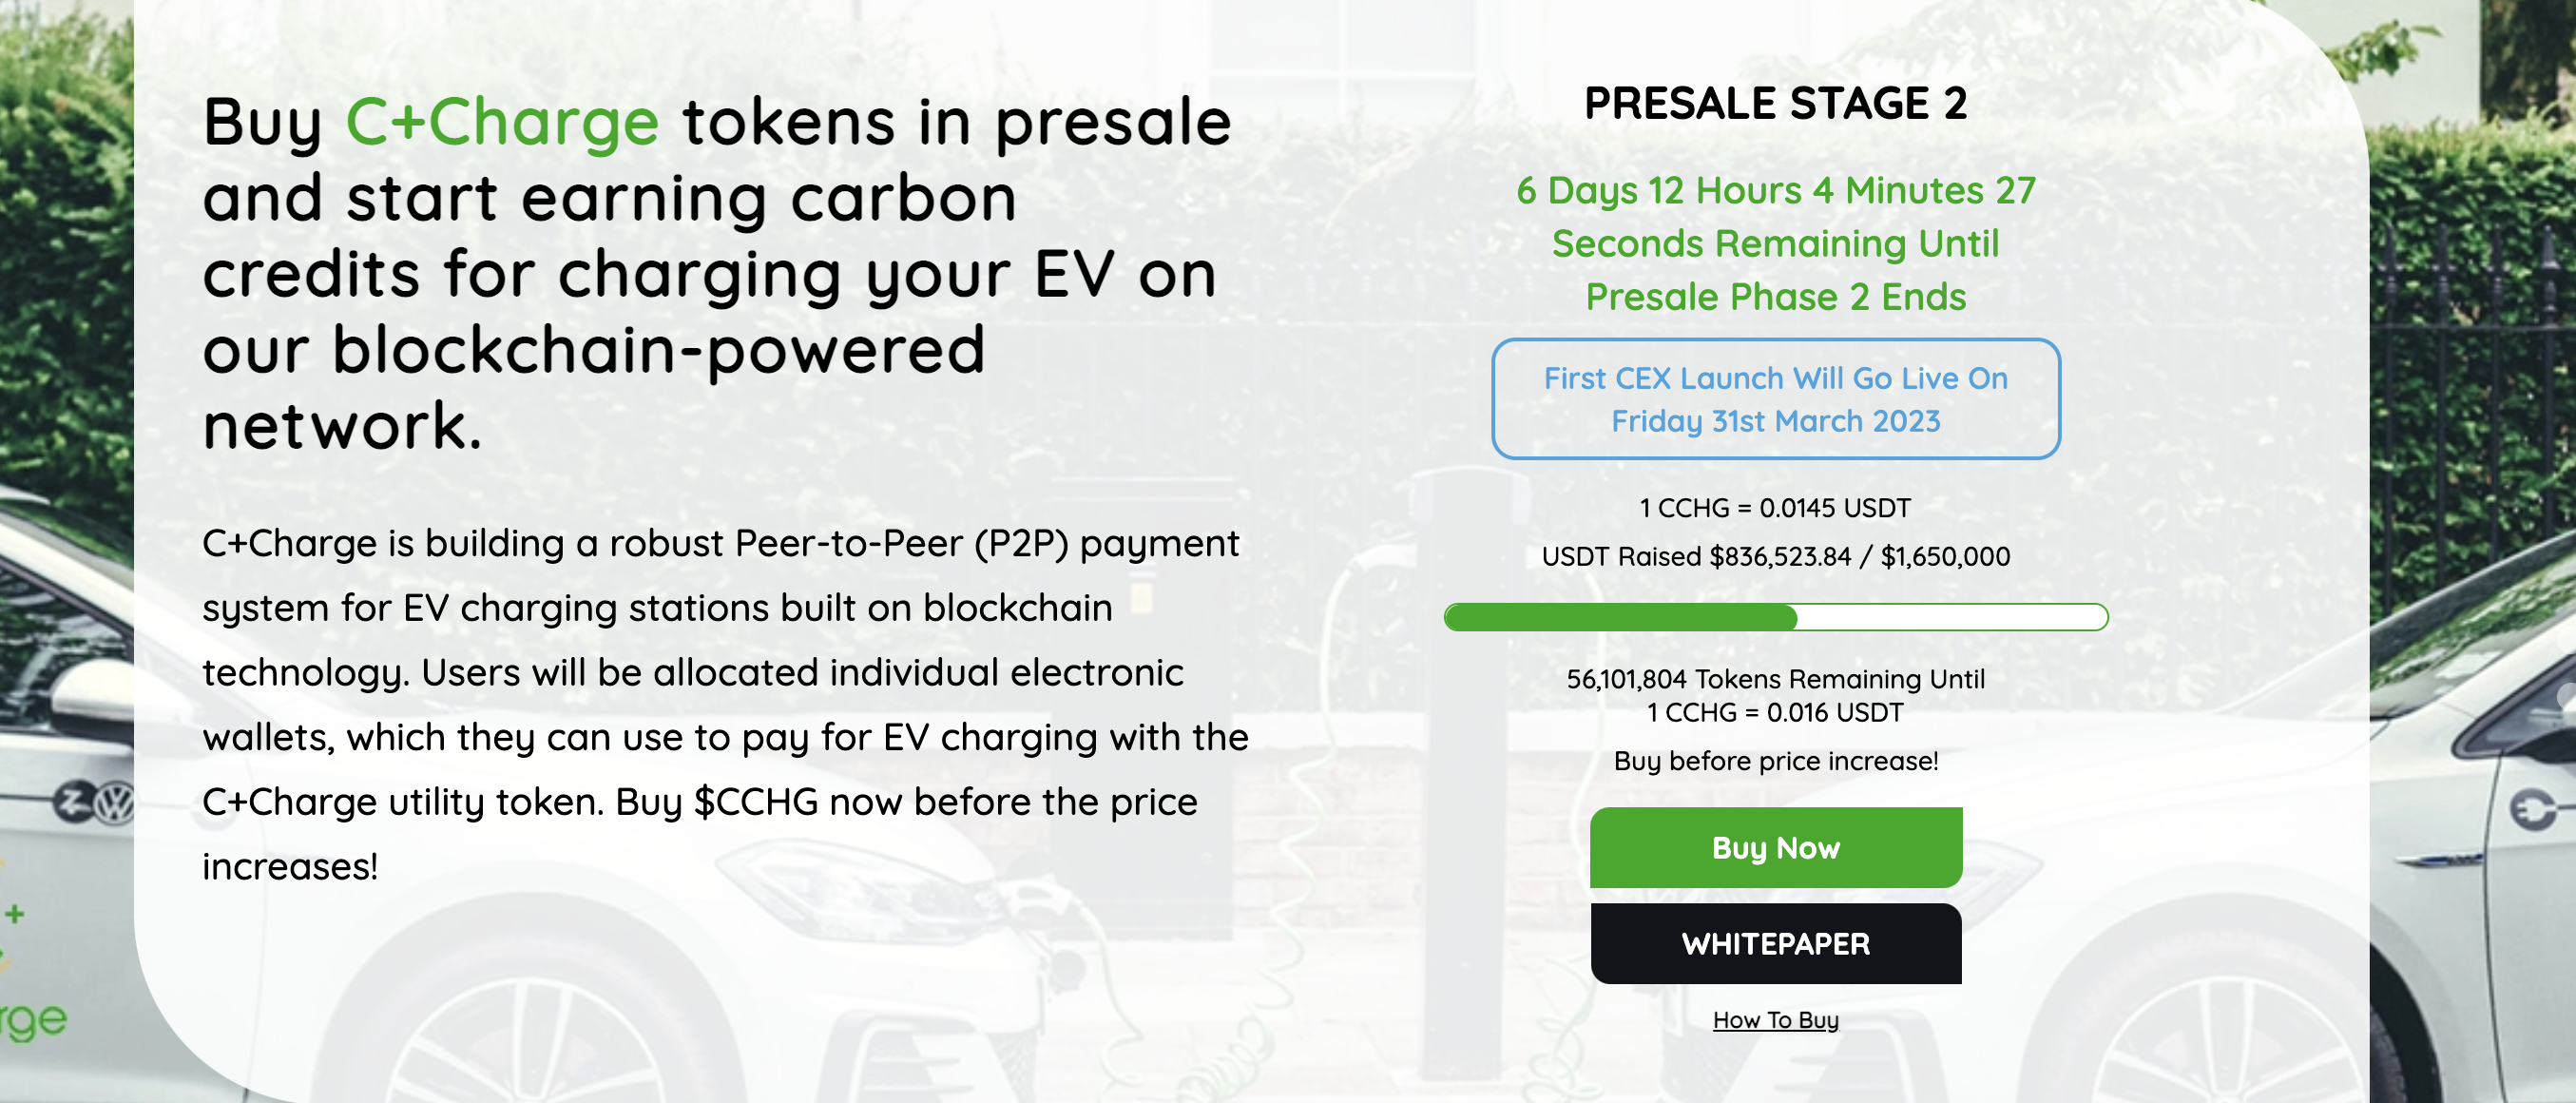 C+Charge Presale Stage 1